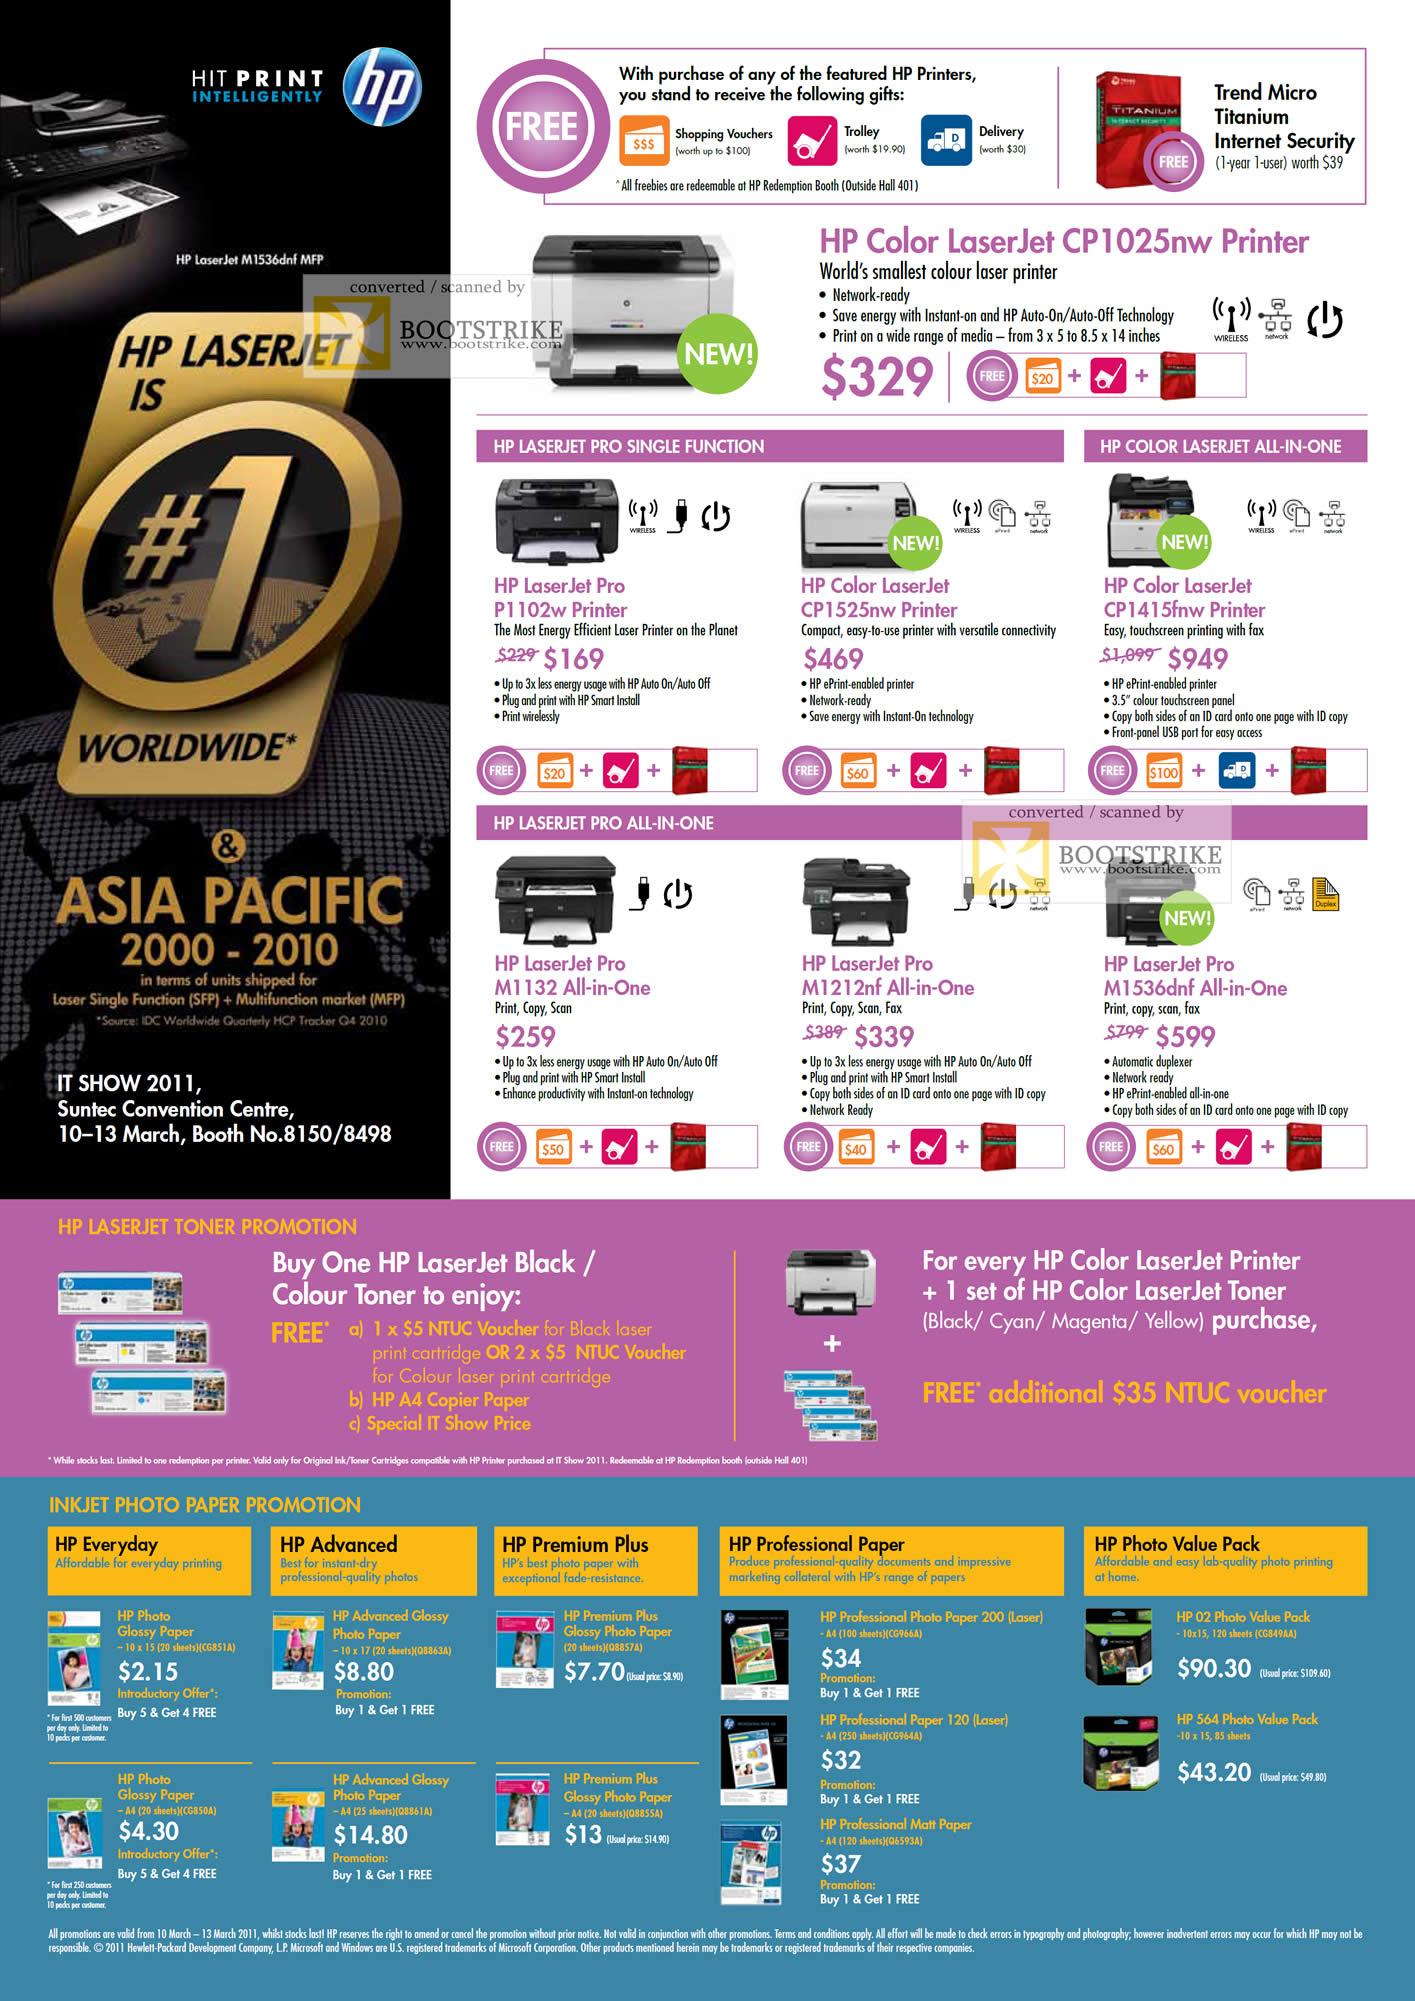 IT Show 2011 price list image brochure of HP Printers Laserjet Pro P1102w CP1525nw CP1415fnw Colour CP1025nw M1132 M1212nf M1536dnf